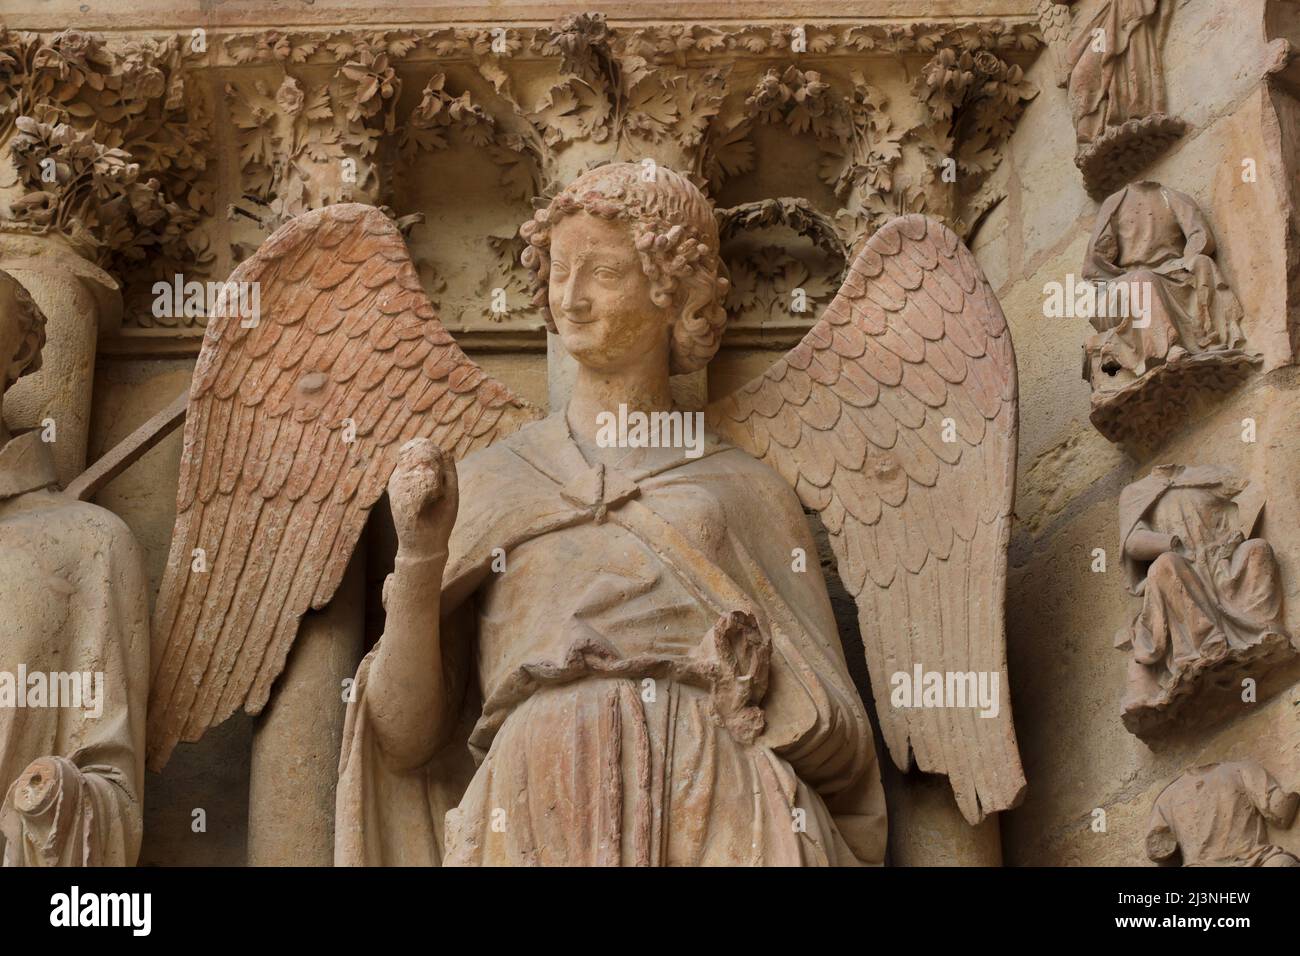 Gothic statue of the Smiling Angel carved between 1230 and 1245 on the north portal of the west facade of the Reims Cathedral (Cathédrale Notre-Dame de Reims) in Reims, France. Stock Photo